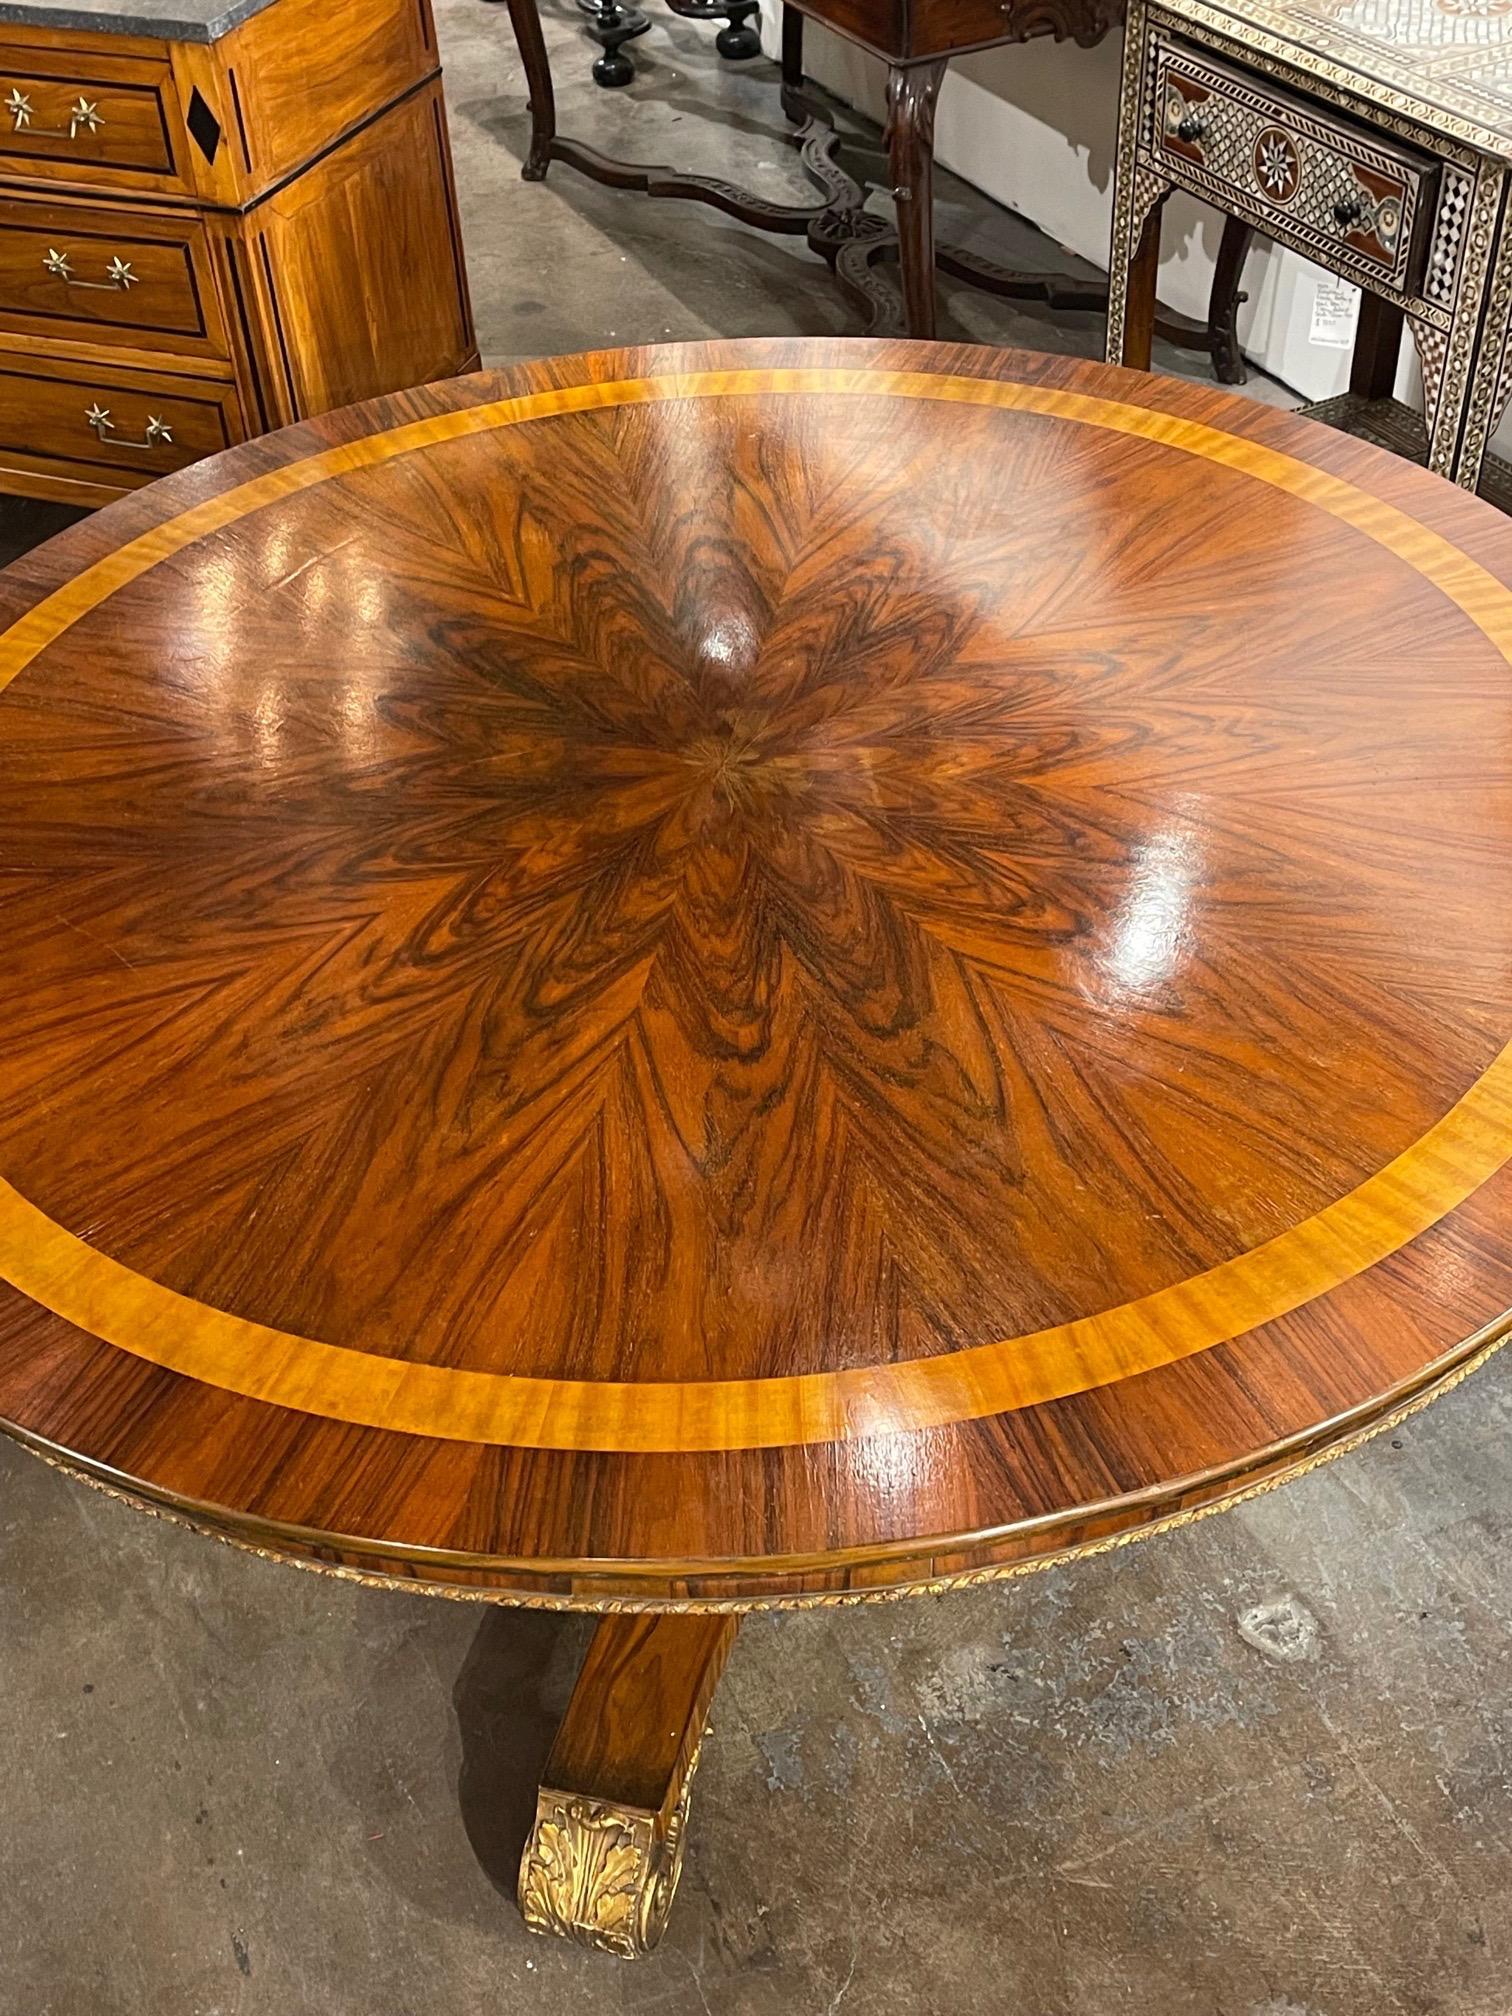 Exquisite 19th century English Regency style black walnut and gilt center table. Beautiful inlaid details along with gorgeous finish on the wood. The piece also has very Fine gilt details. Stunning!!